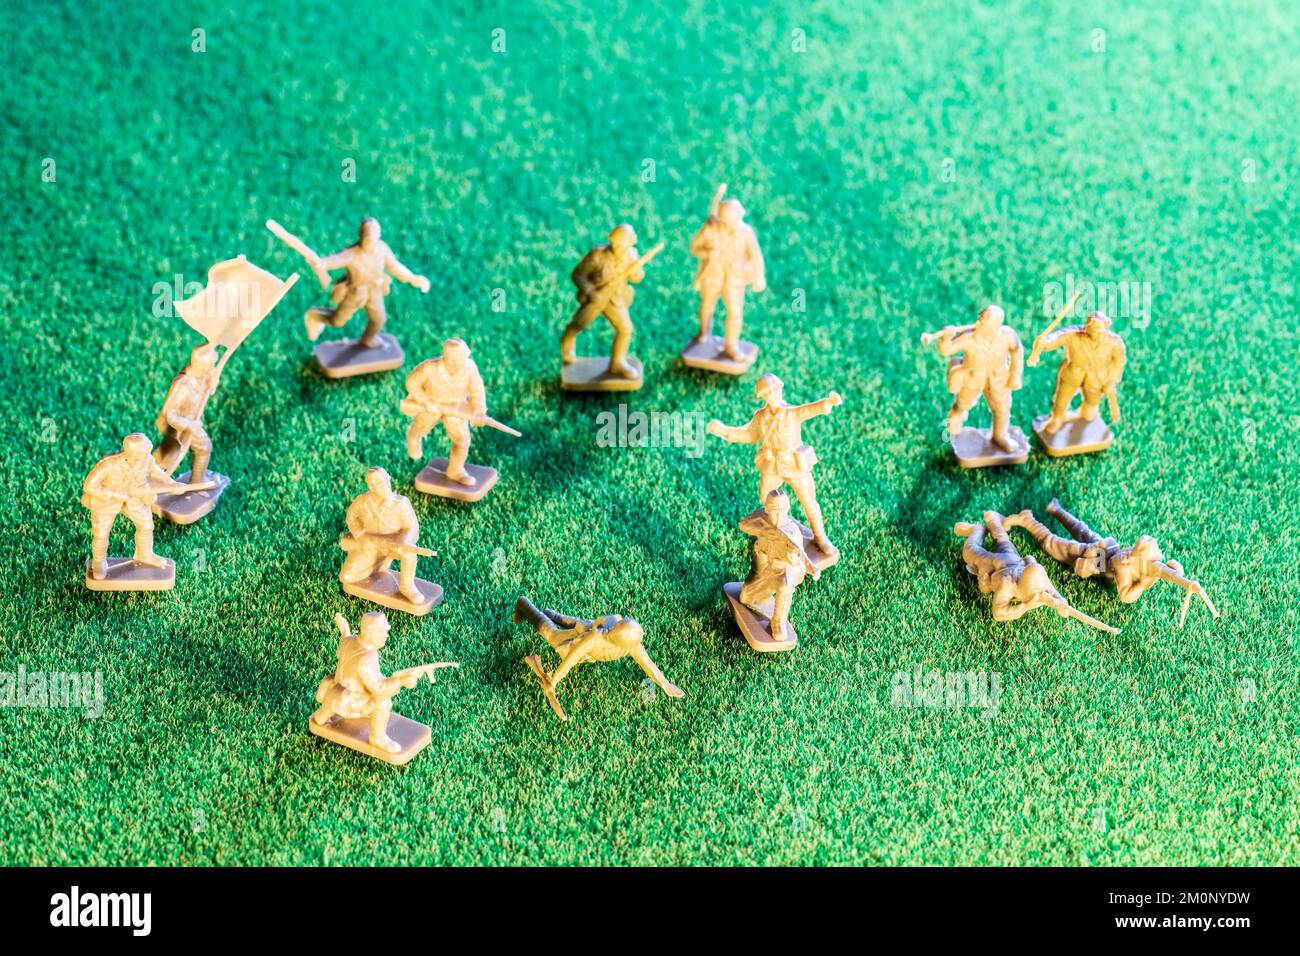 Airfix HO/00 scale plastic model figures. Japanese infantry from world war two, various figures in poses on green grass texture background Stock Photo